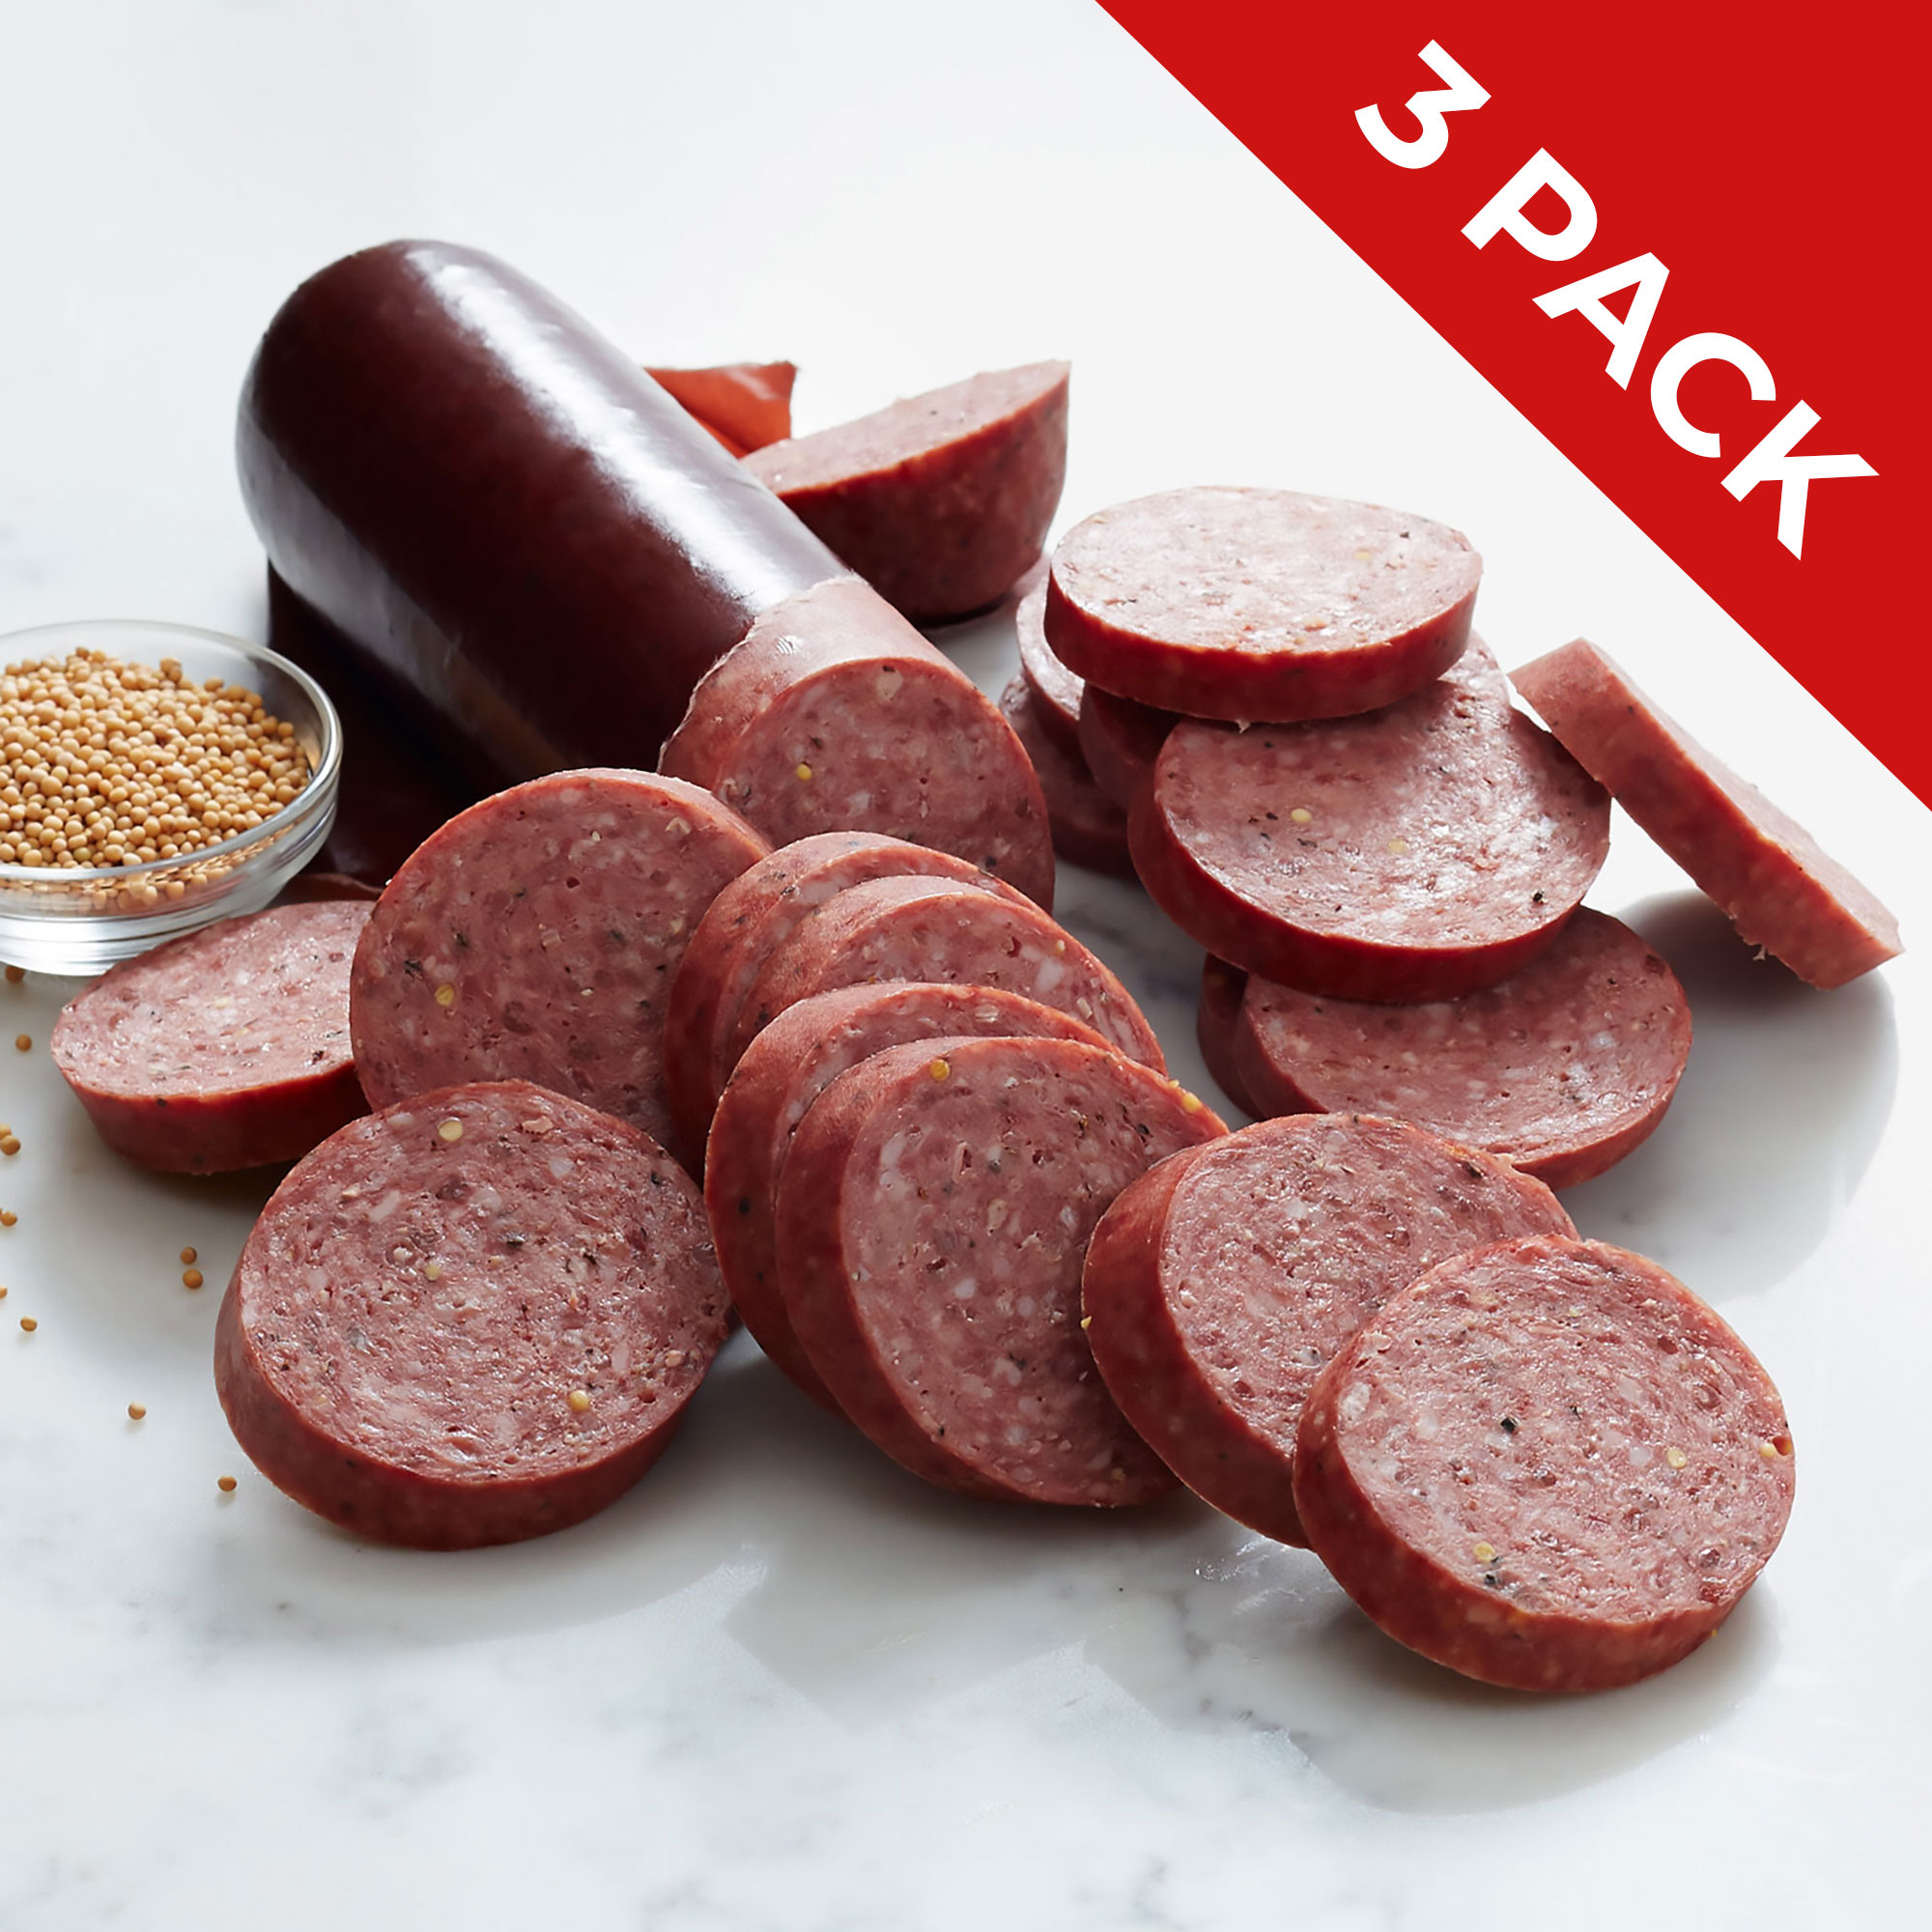 Hickory Farms Set of Three (10 oz) Smoked Signature Beef Summer Sausages 